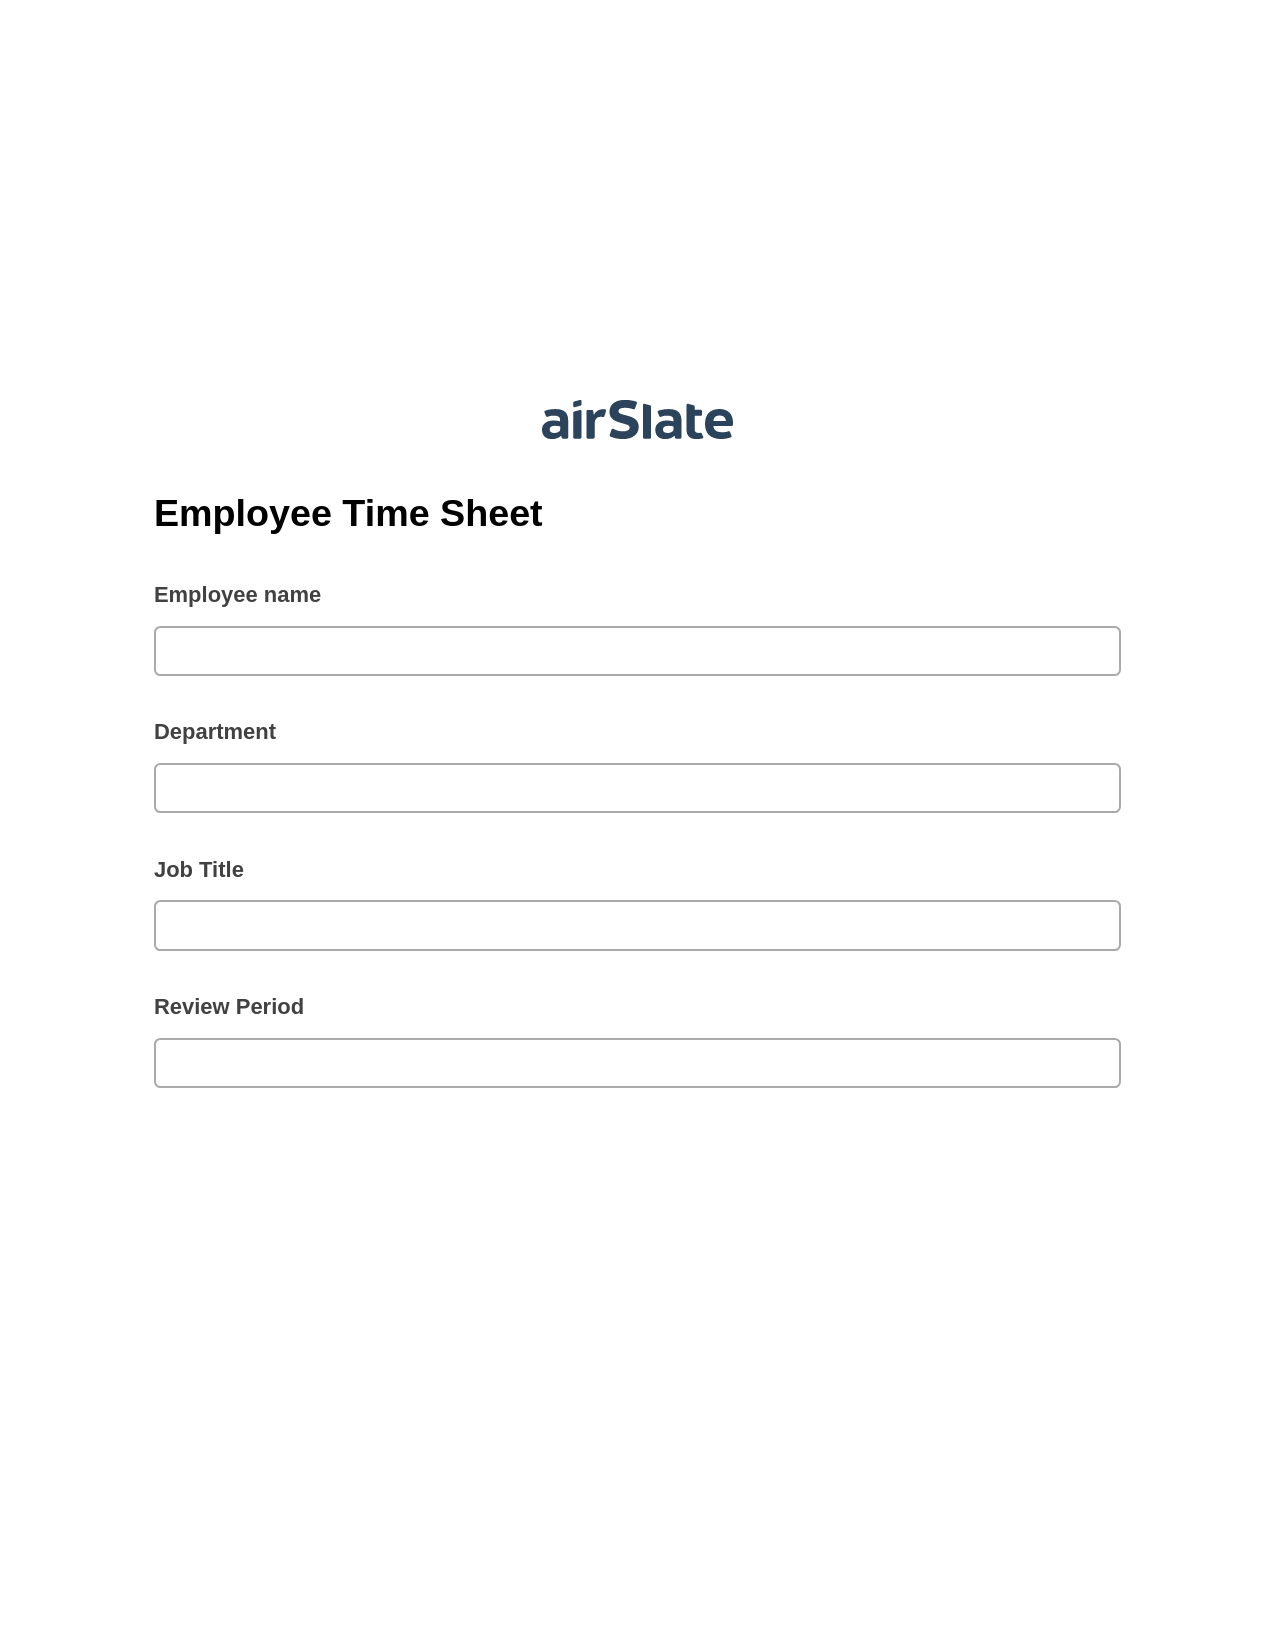 Multirole Employee Time Sheet Pre-fill Dropdowns from CSV file Bot, Create Salesforce Records Bot, Post-finish Document Bot